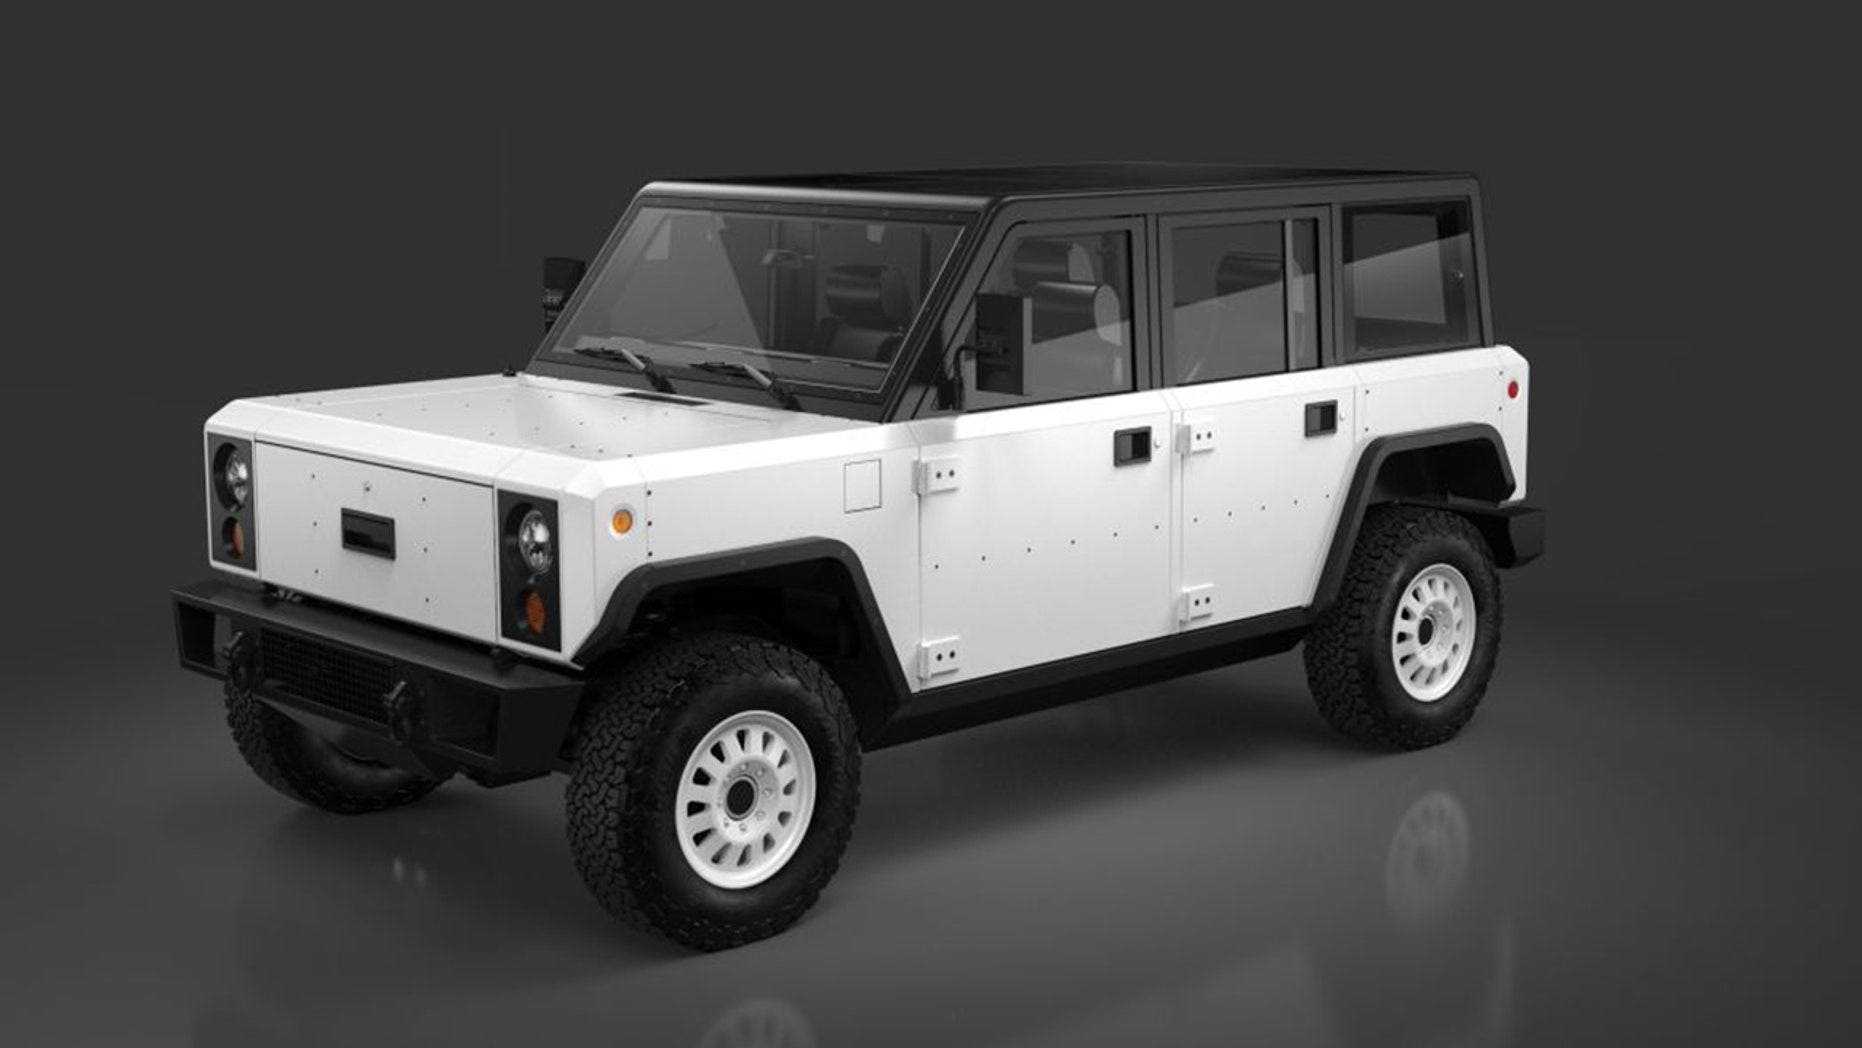 The boxy Bollinger Motors electric SUV isn't happening anytime soon